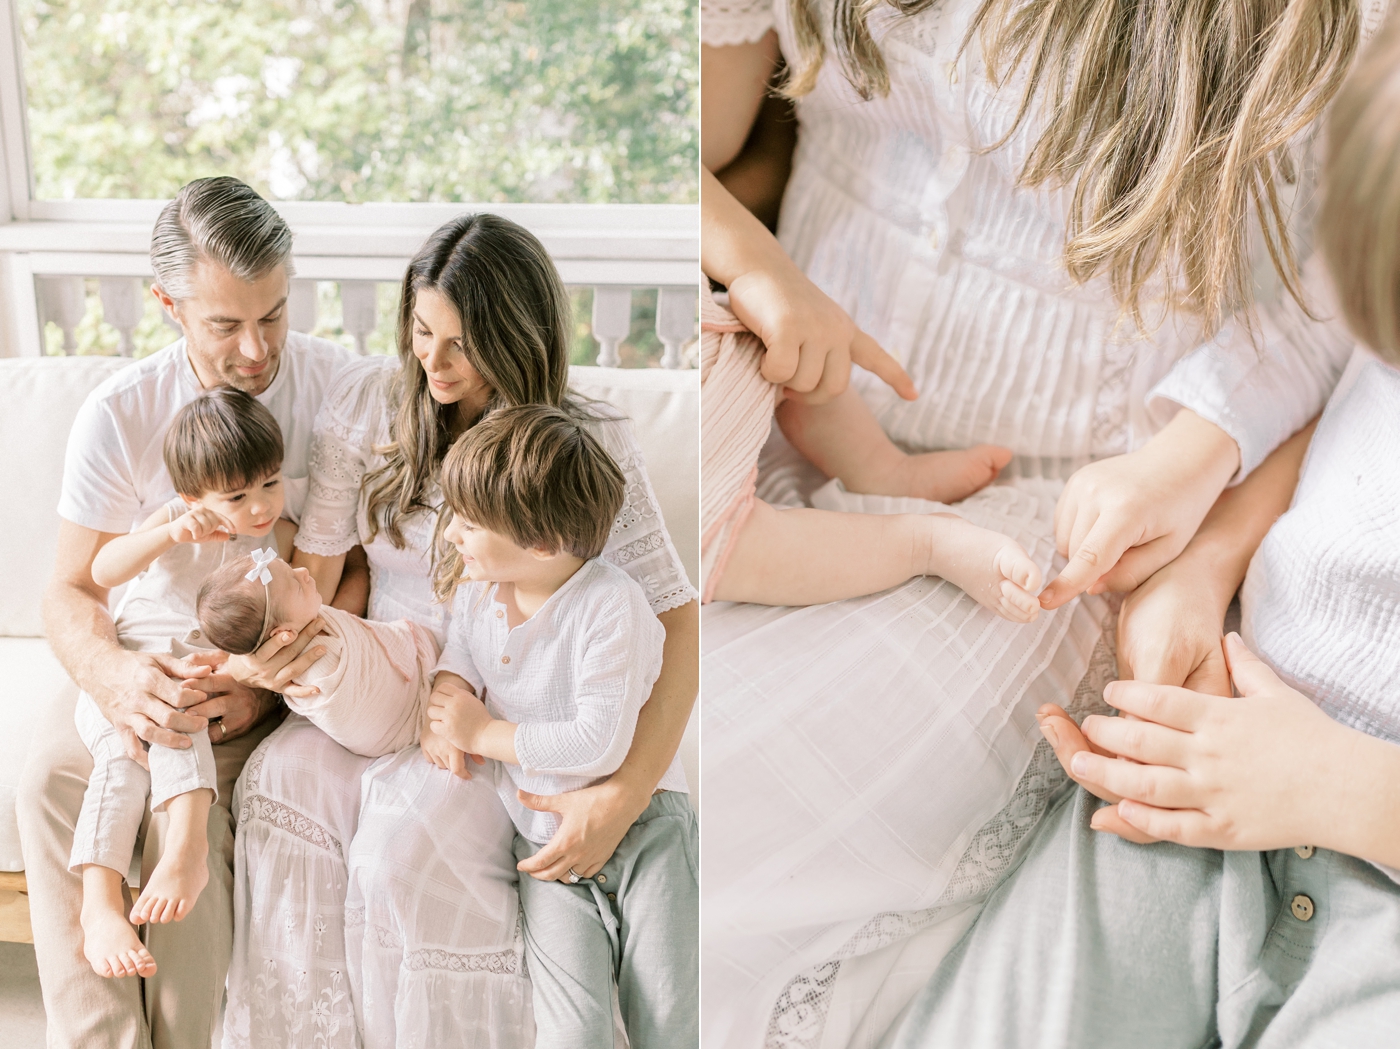 Family looking at newborn baby on Mom's lap. Photos by Caitlyn Motycka Photography.